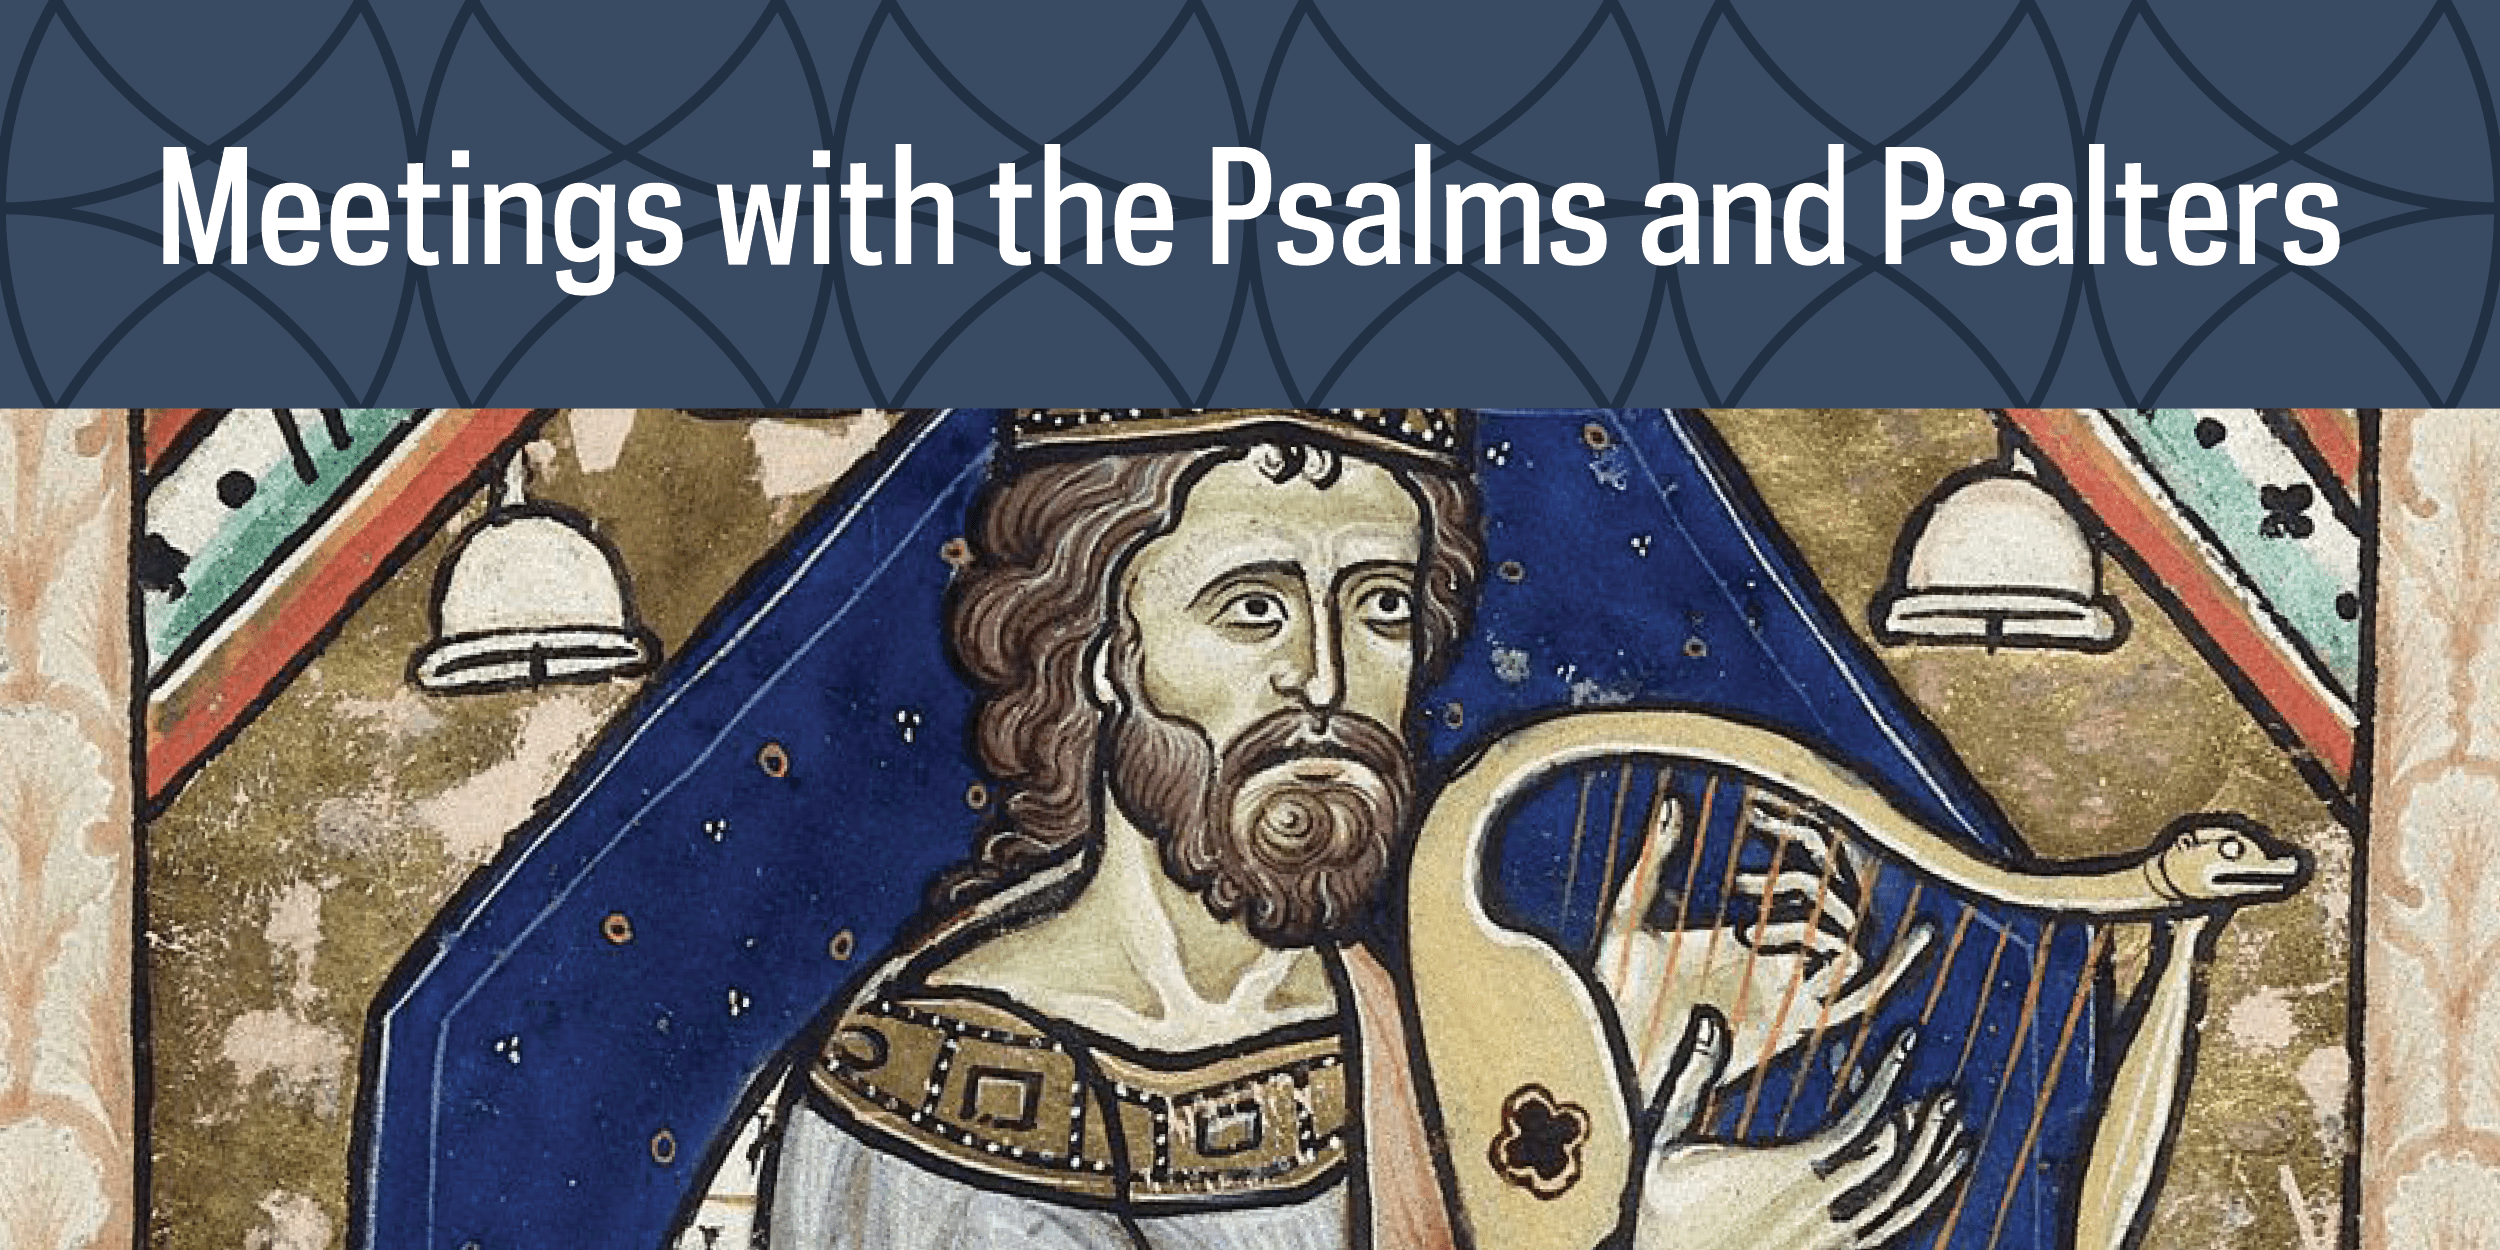 “Practice and Symbolism in An Unpublished Fifteenth-Century Psalmic Prayer to the Five Wounds”